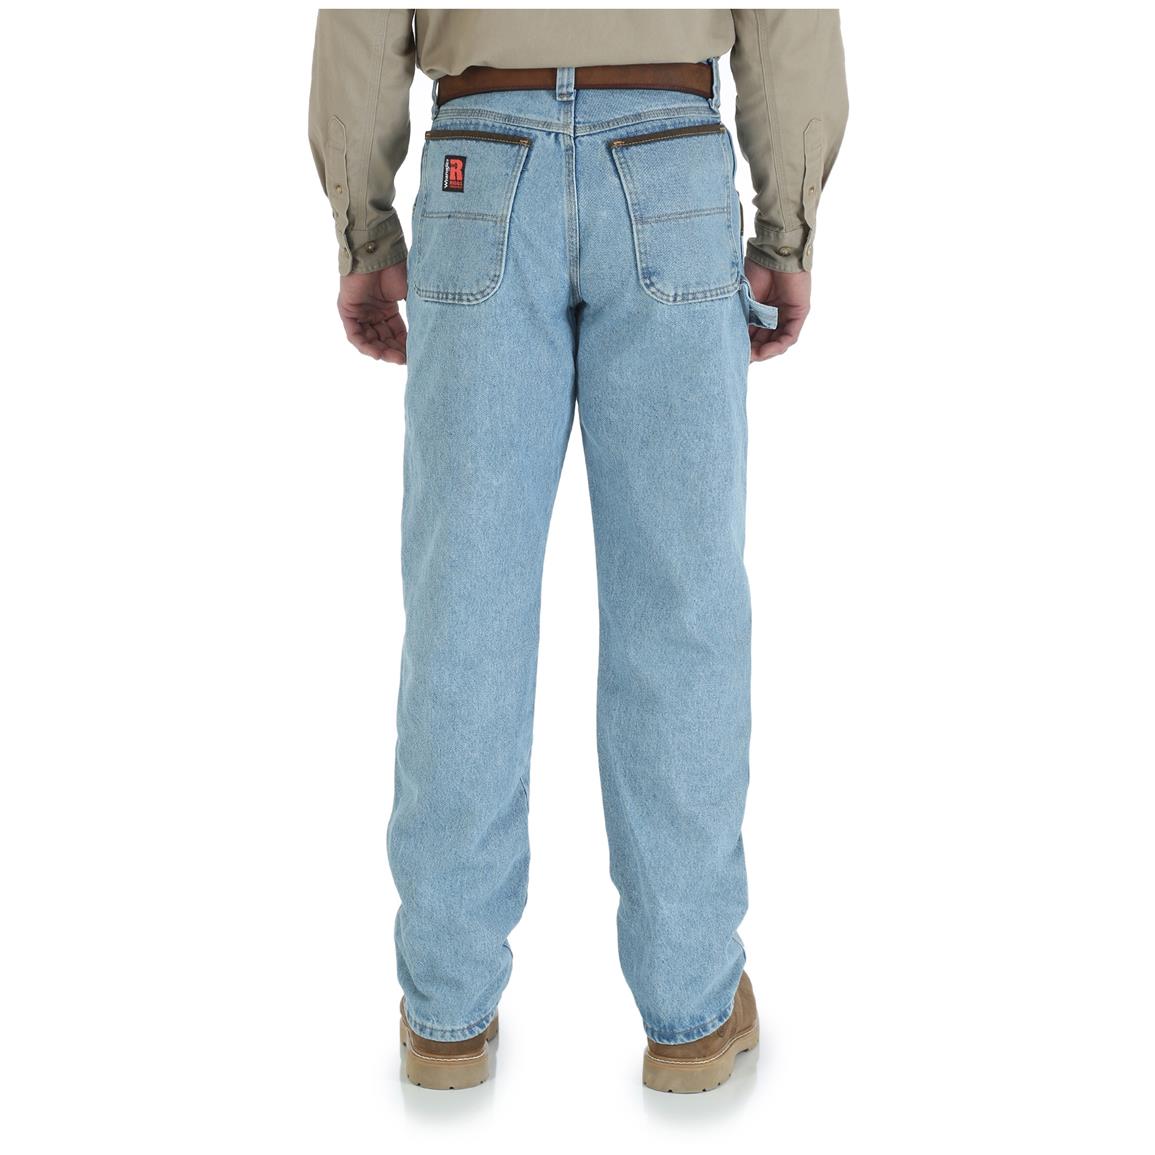 Wrangler RIGGS Workwear Workhorse Relaxed Fit Jeans - 670449, Jeans ...